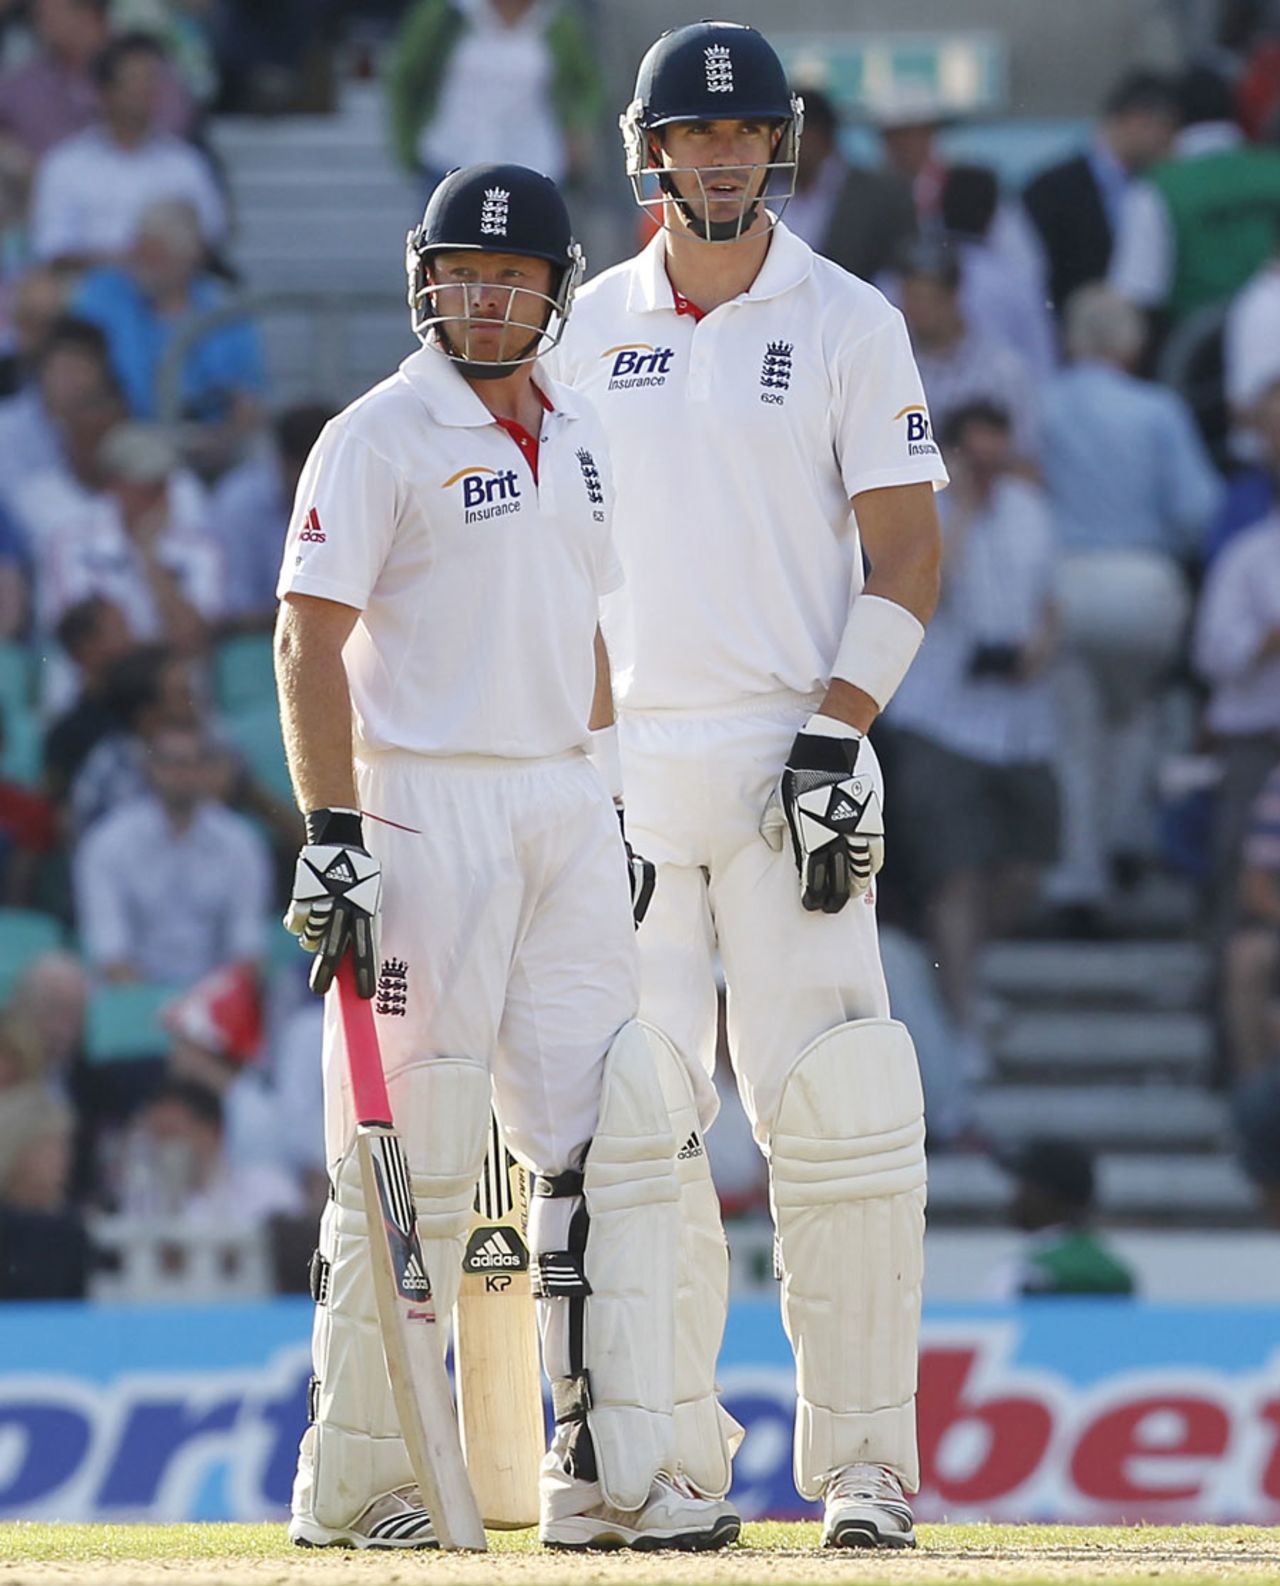 Ian Bell and Kevin Pietersen have a chat during their partnership, England v India, 4th Test, The Oval, 2nd day, August 19, 2011